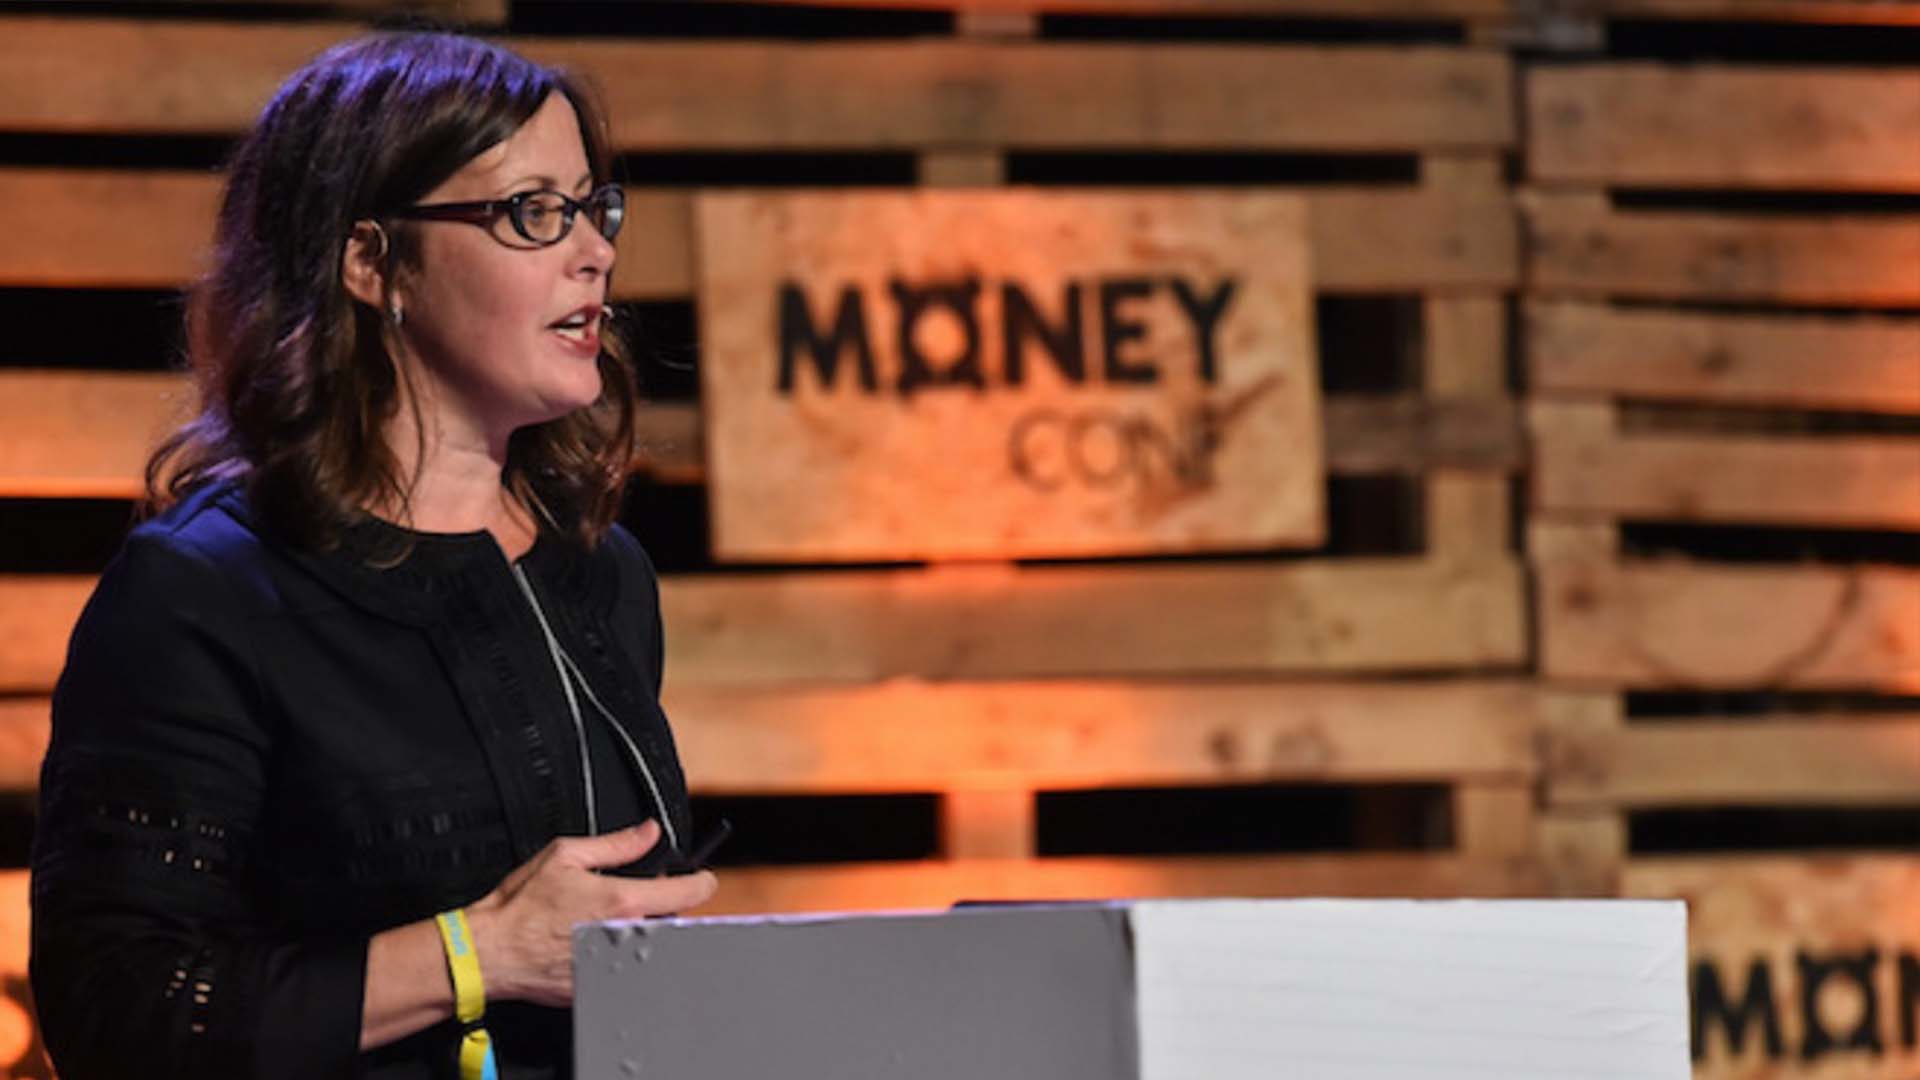 Kathryn Petralia speaks at the money conference